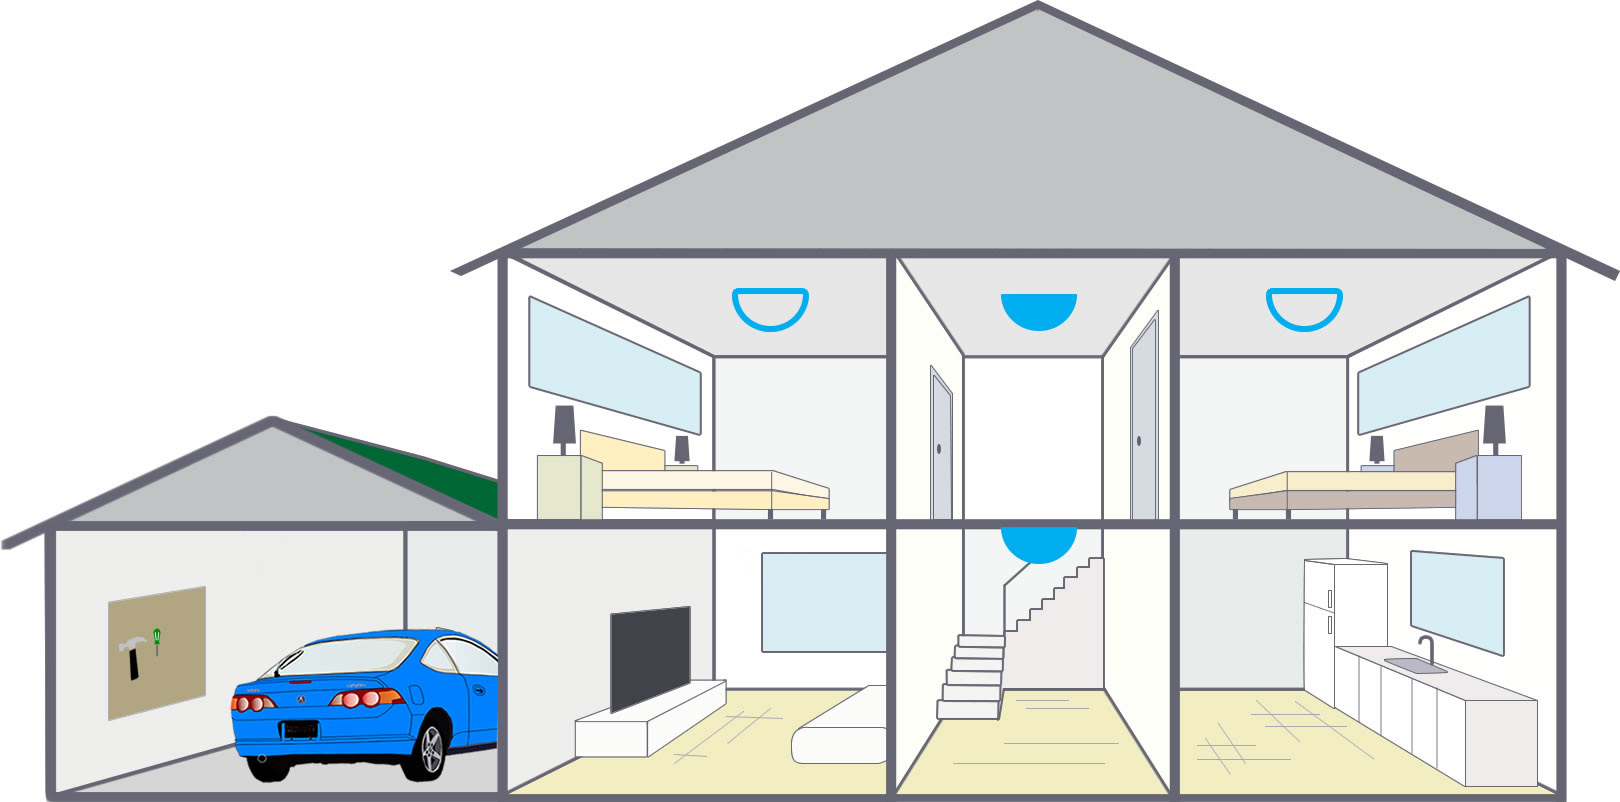 Multi-level house with cars in garage and driveway.